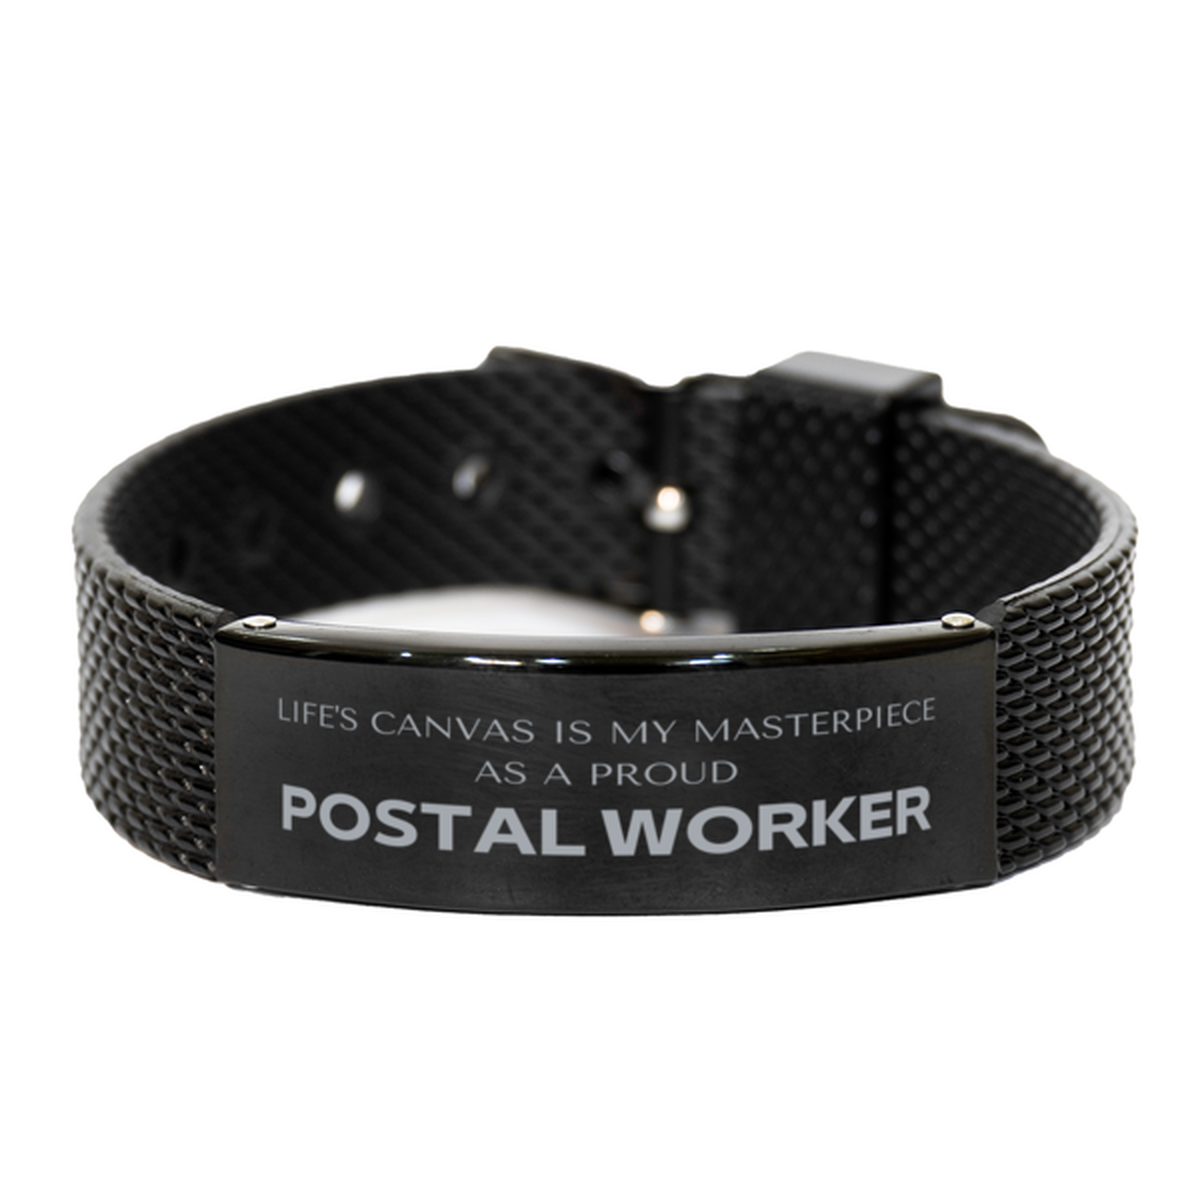 Proud Postal Worker Gifts, Life's canvas is my masterpiece, Epic Birthday Christmas Unique Black Shark Mesh Bracelet For Postal Worker, Coworkers, Men, Women, Friends